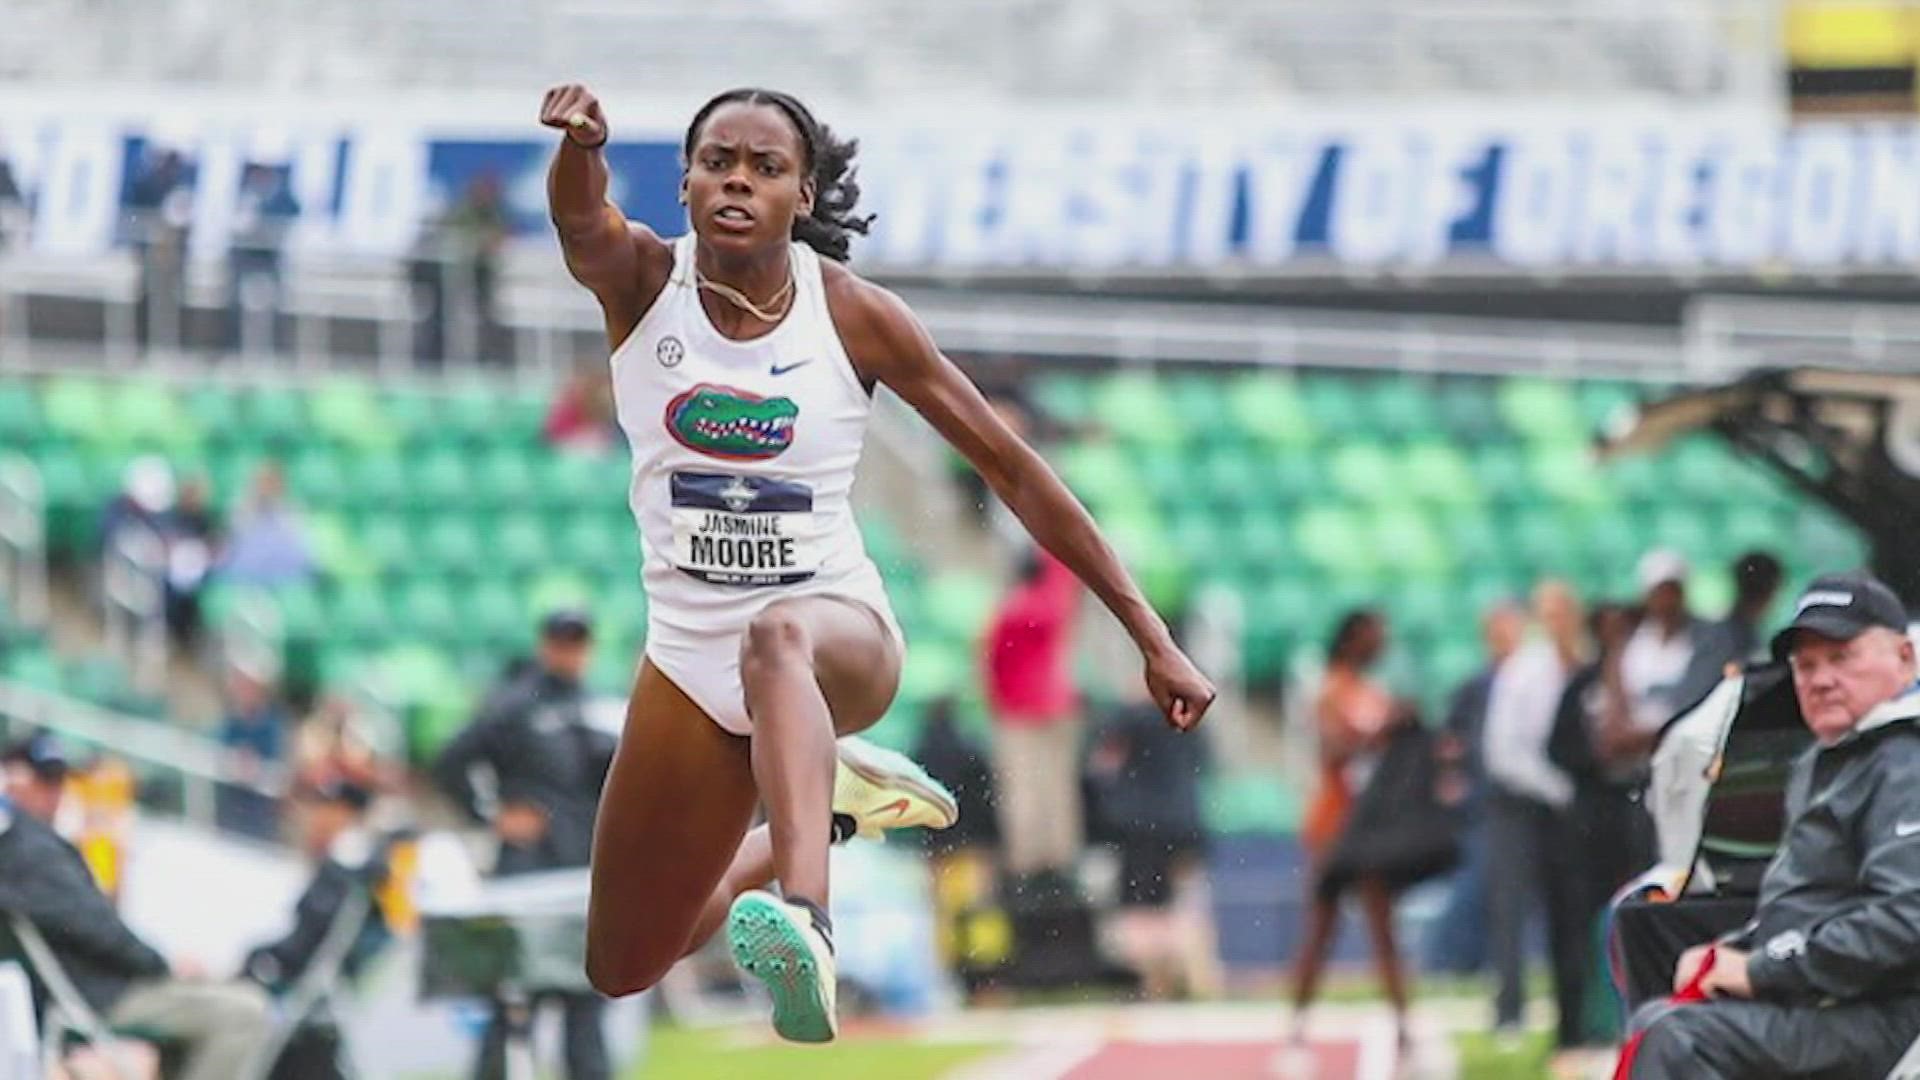 Last weekend, Moore qualified for the World Championship in Oregon in both triple jump and long jump. She's the first American woman to ever do that.